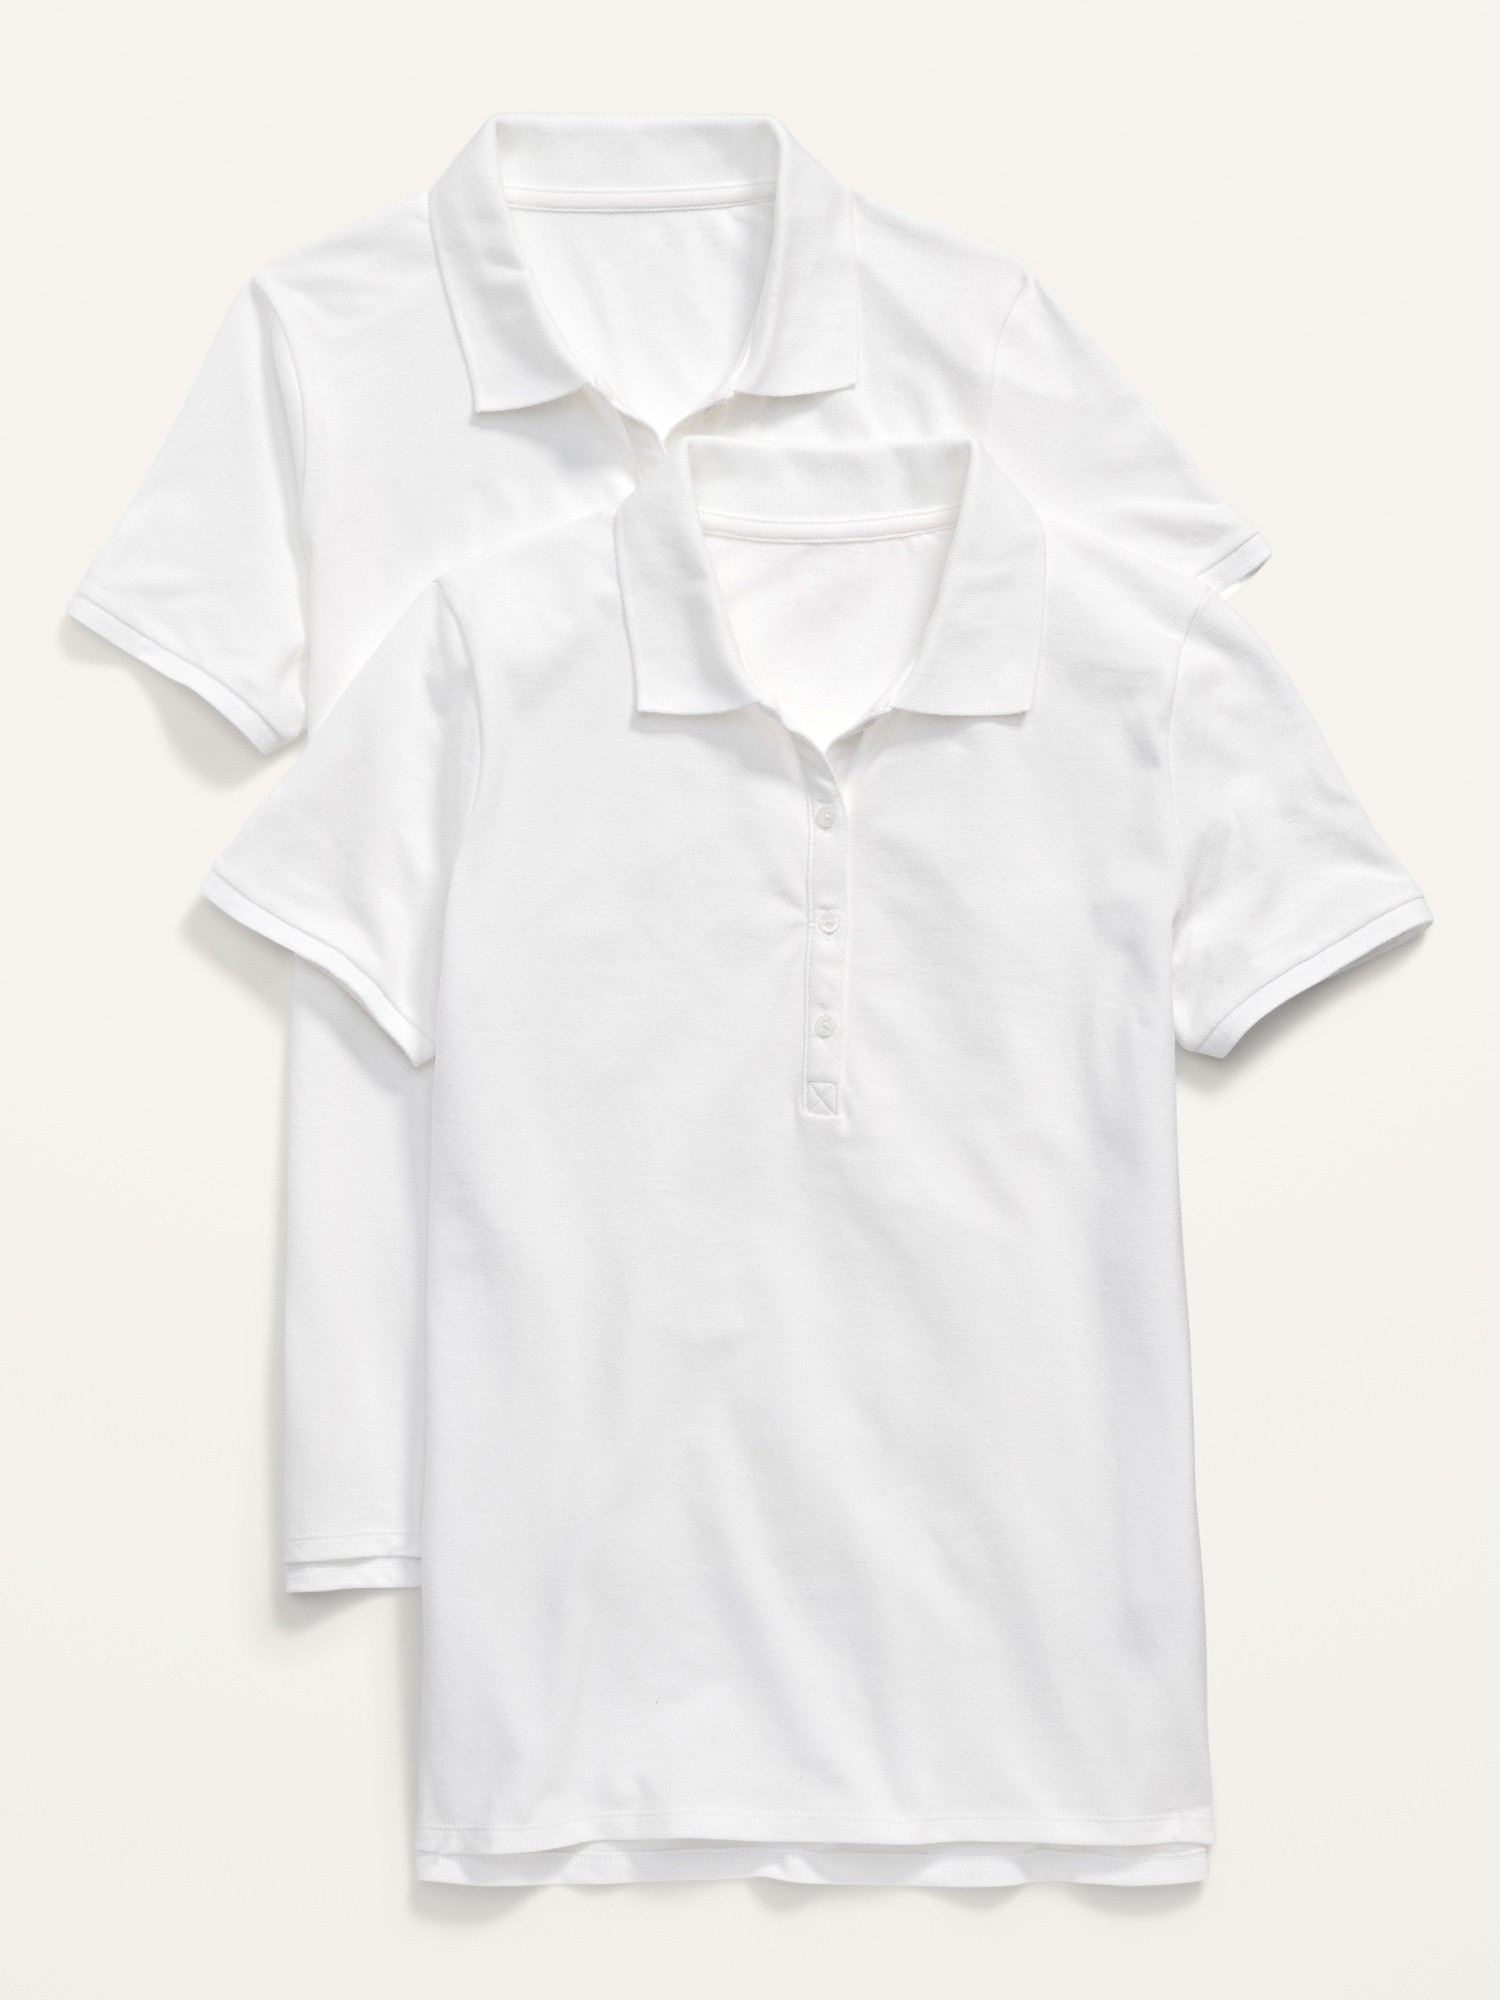 Old Navy Semi-Fitted Uniform Pique Polo Shirt 2-Pack for Women white. 1